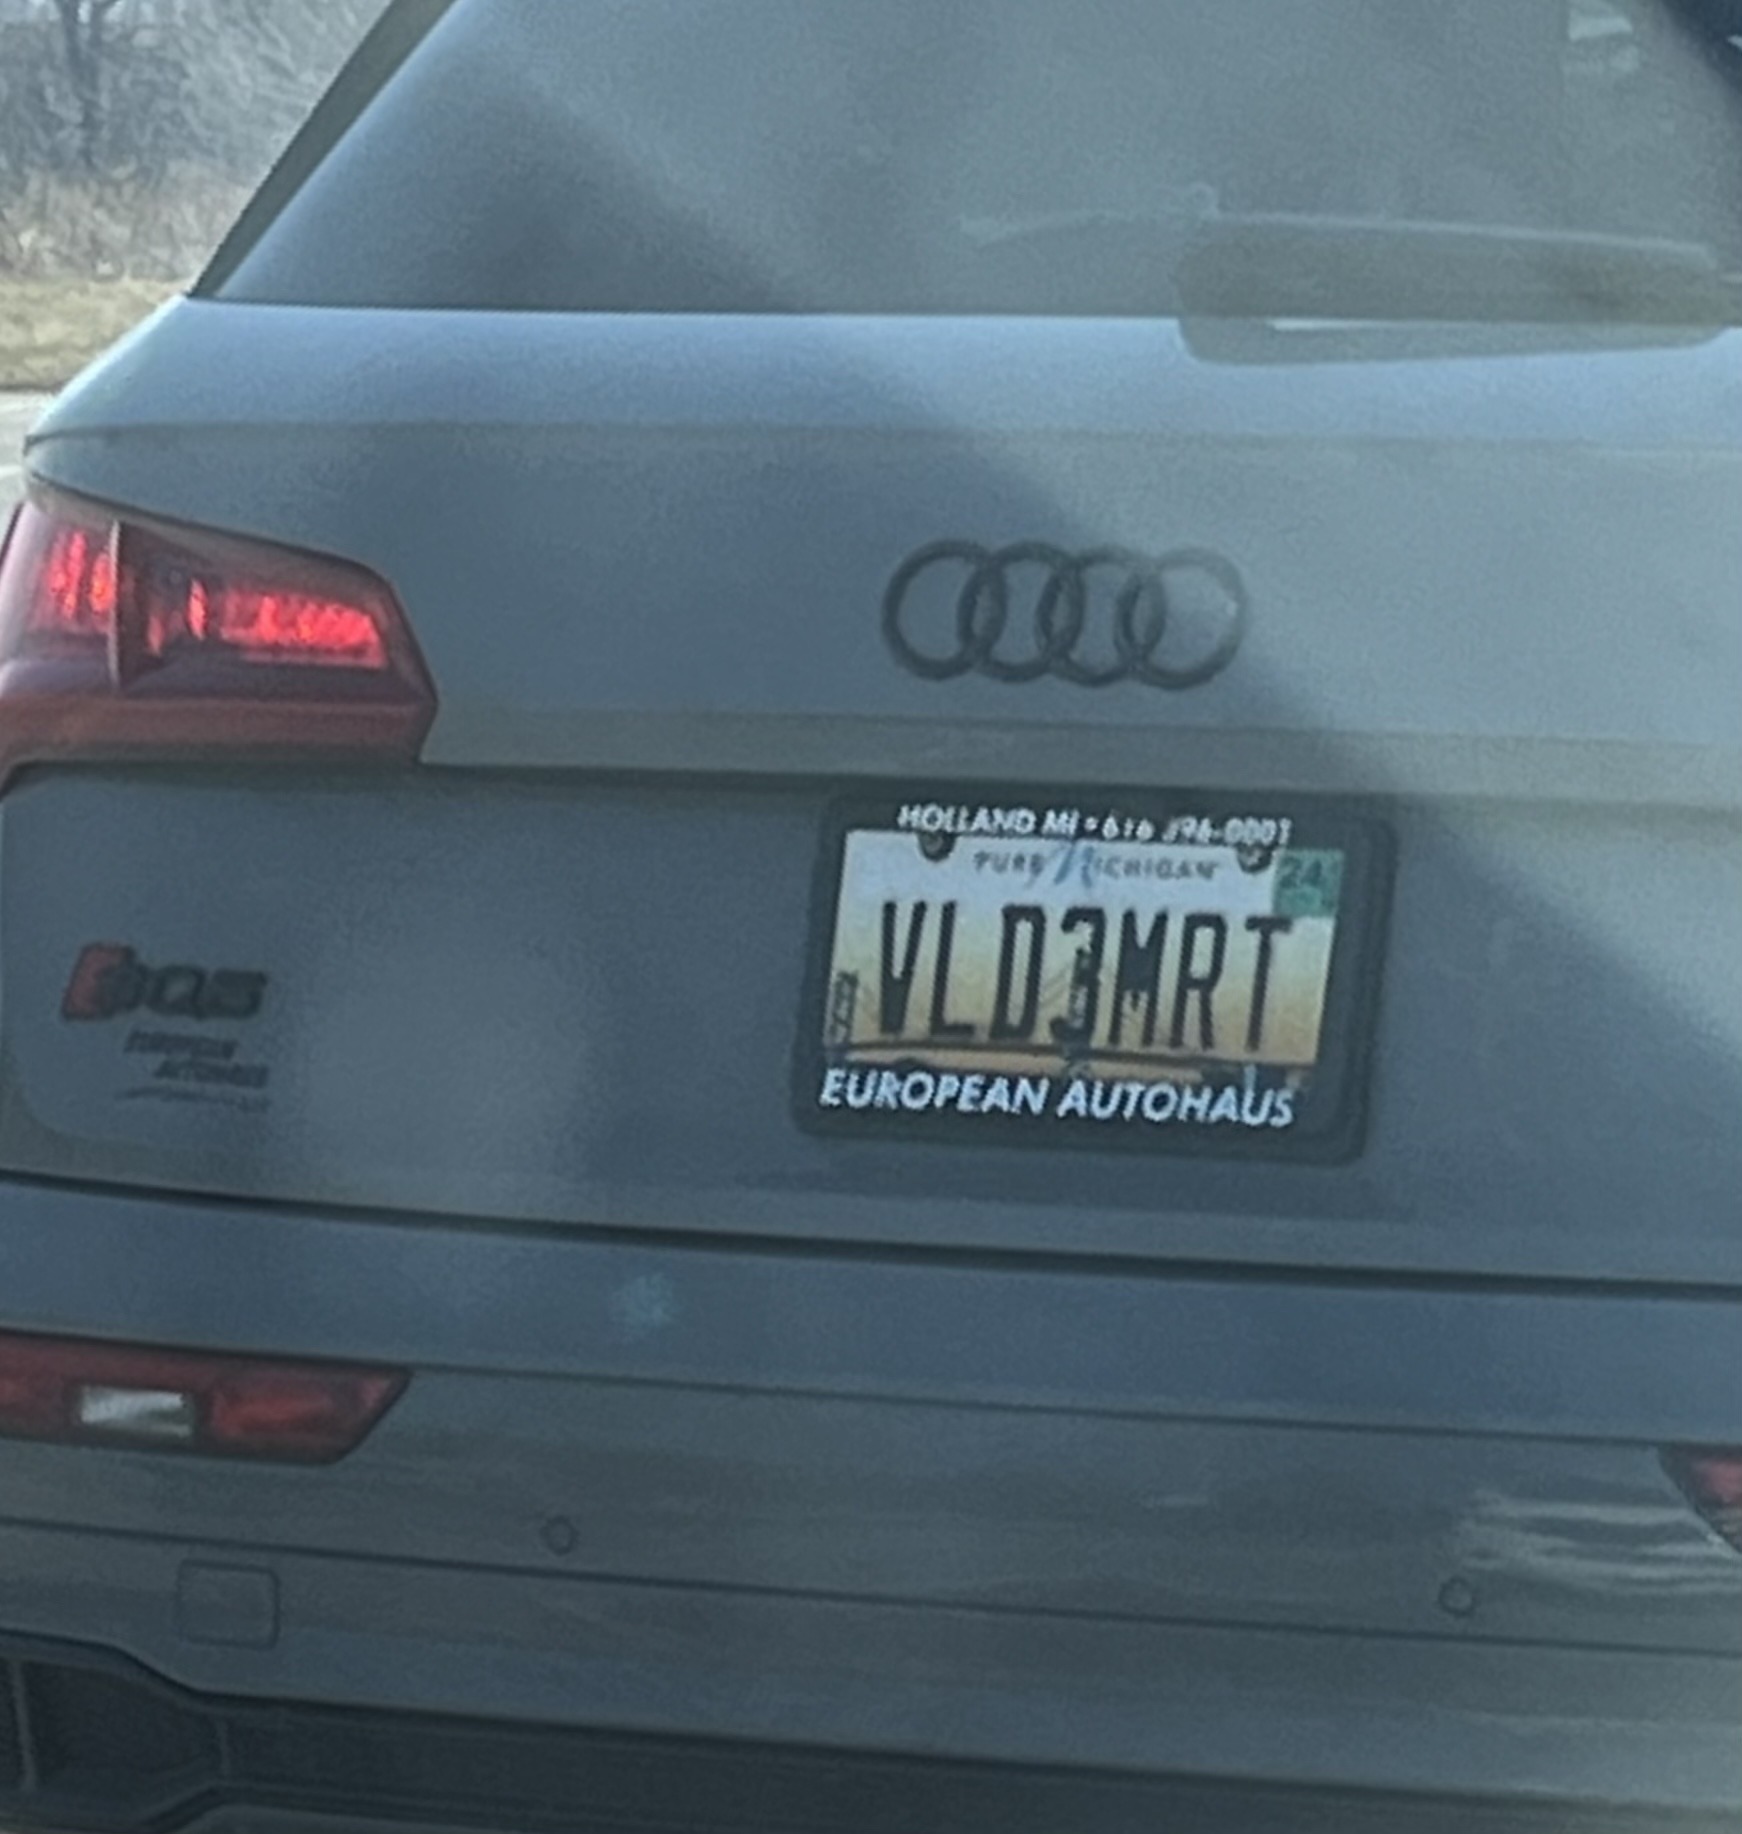 The Children’s Literature Vanity License Plate That Must Not Be Named